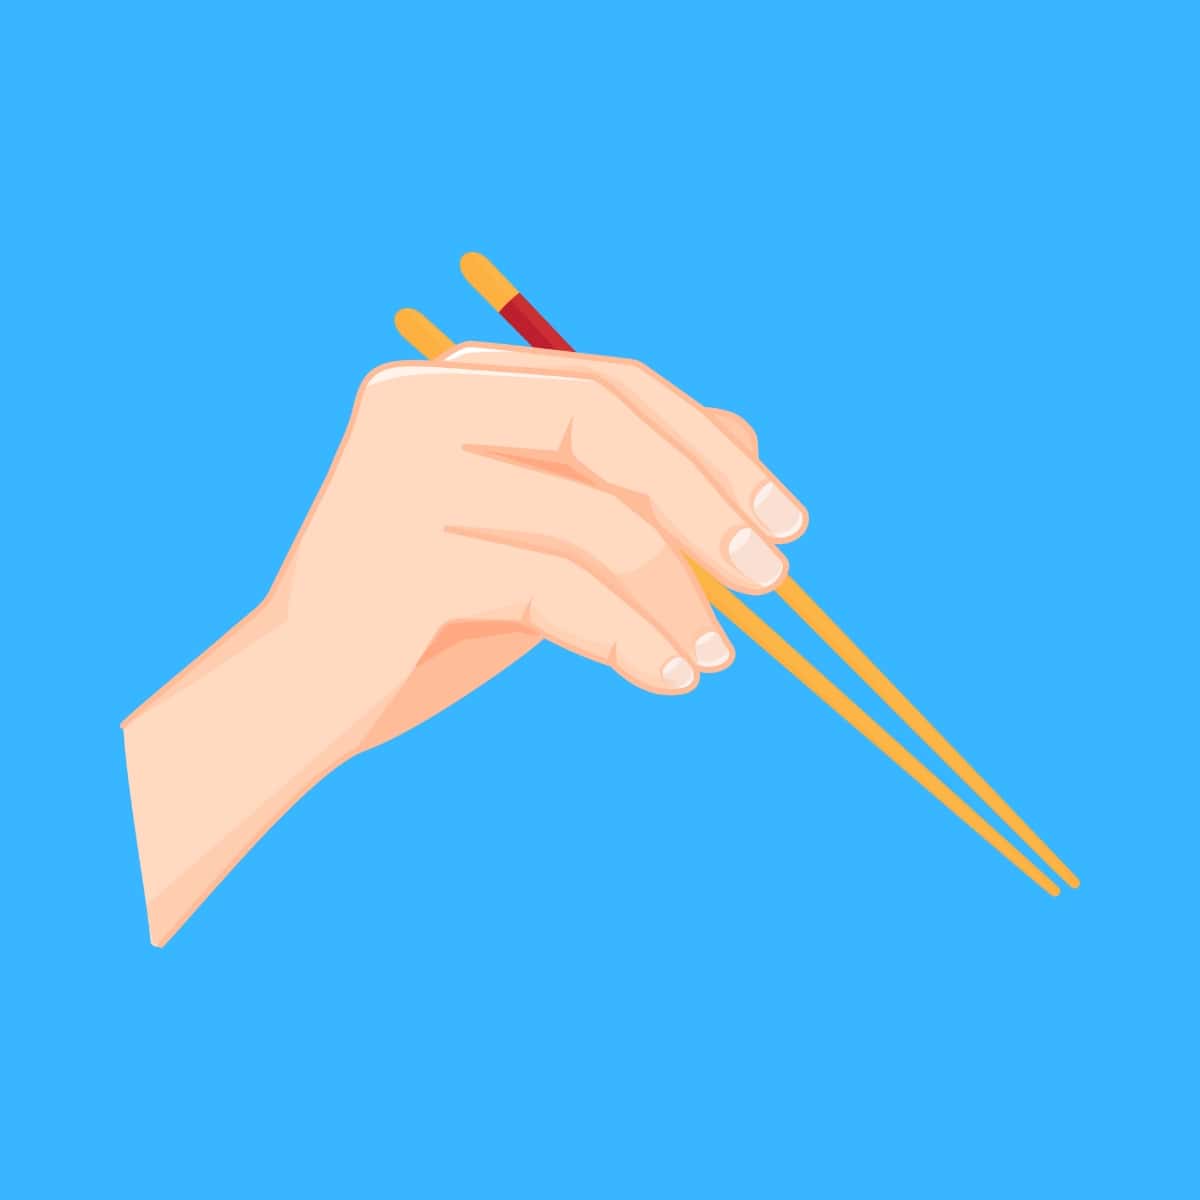 Cartoon graphic of a hand holding chopsticks on a blue background.